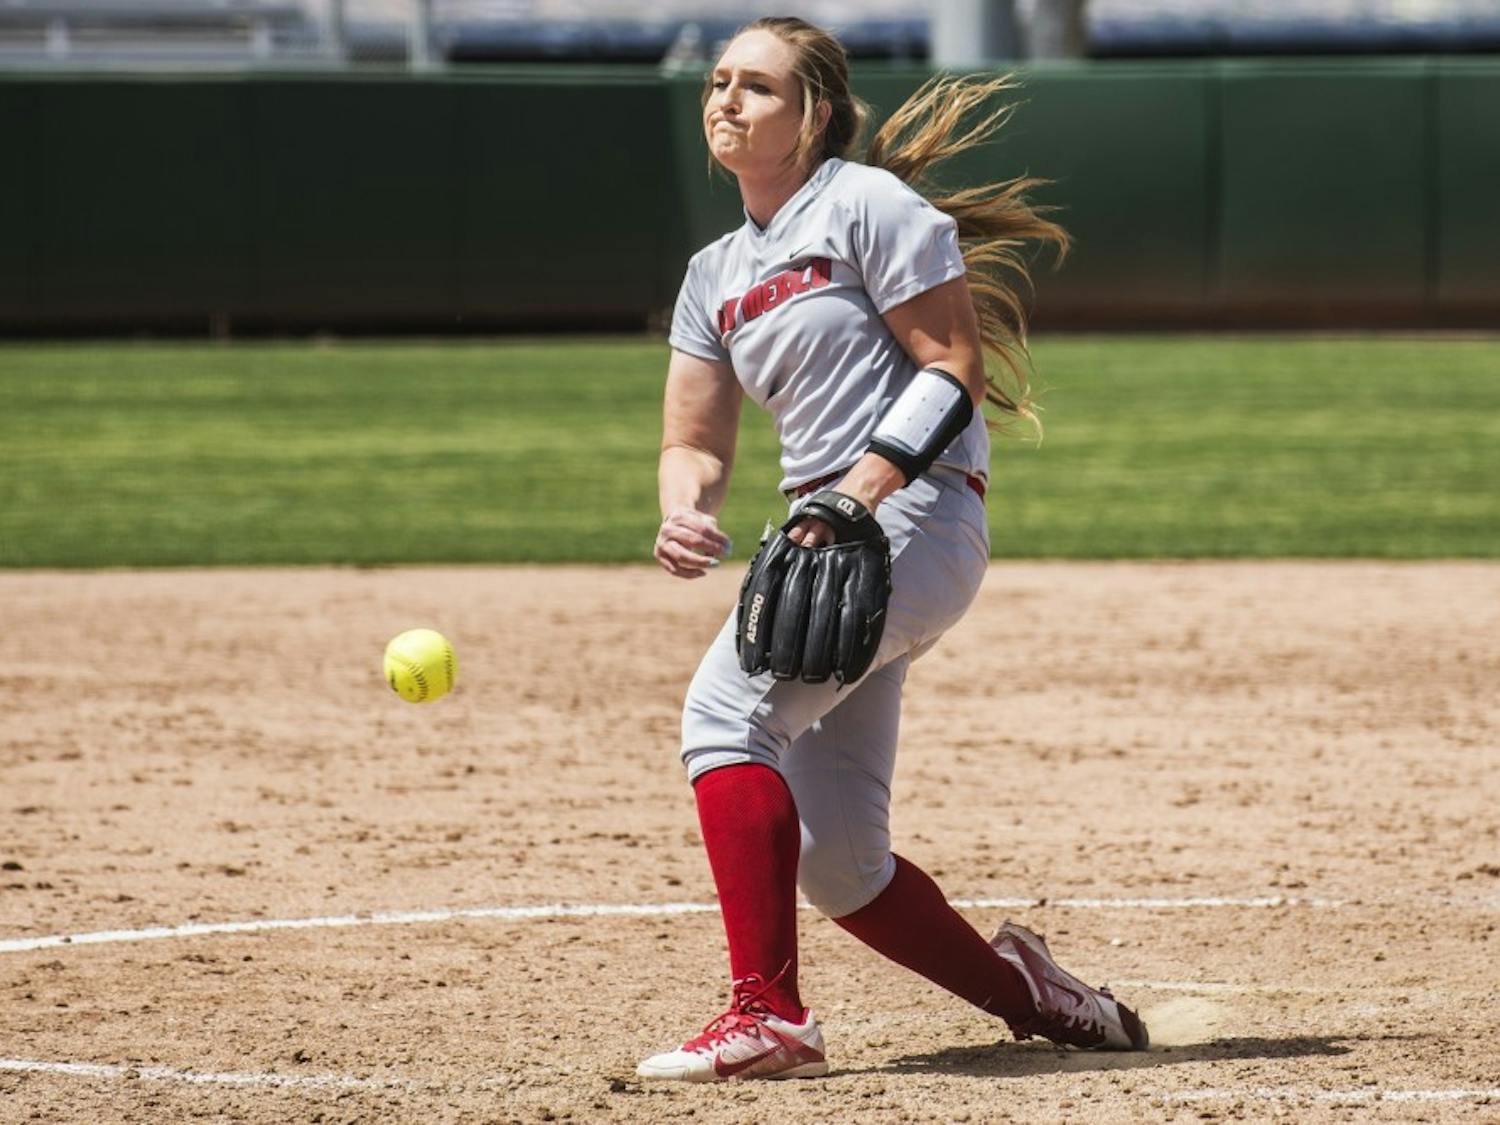 Freshman pitcher Collette Robert pitches against a Fresno State batter Sunday afternoon at the Lobo Softball Field. The Lobos were swept by Fresno State this weekend by a combined score of 28-8.